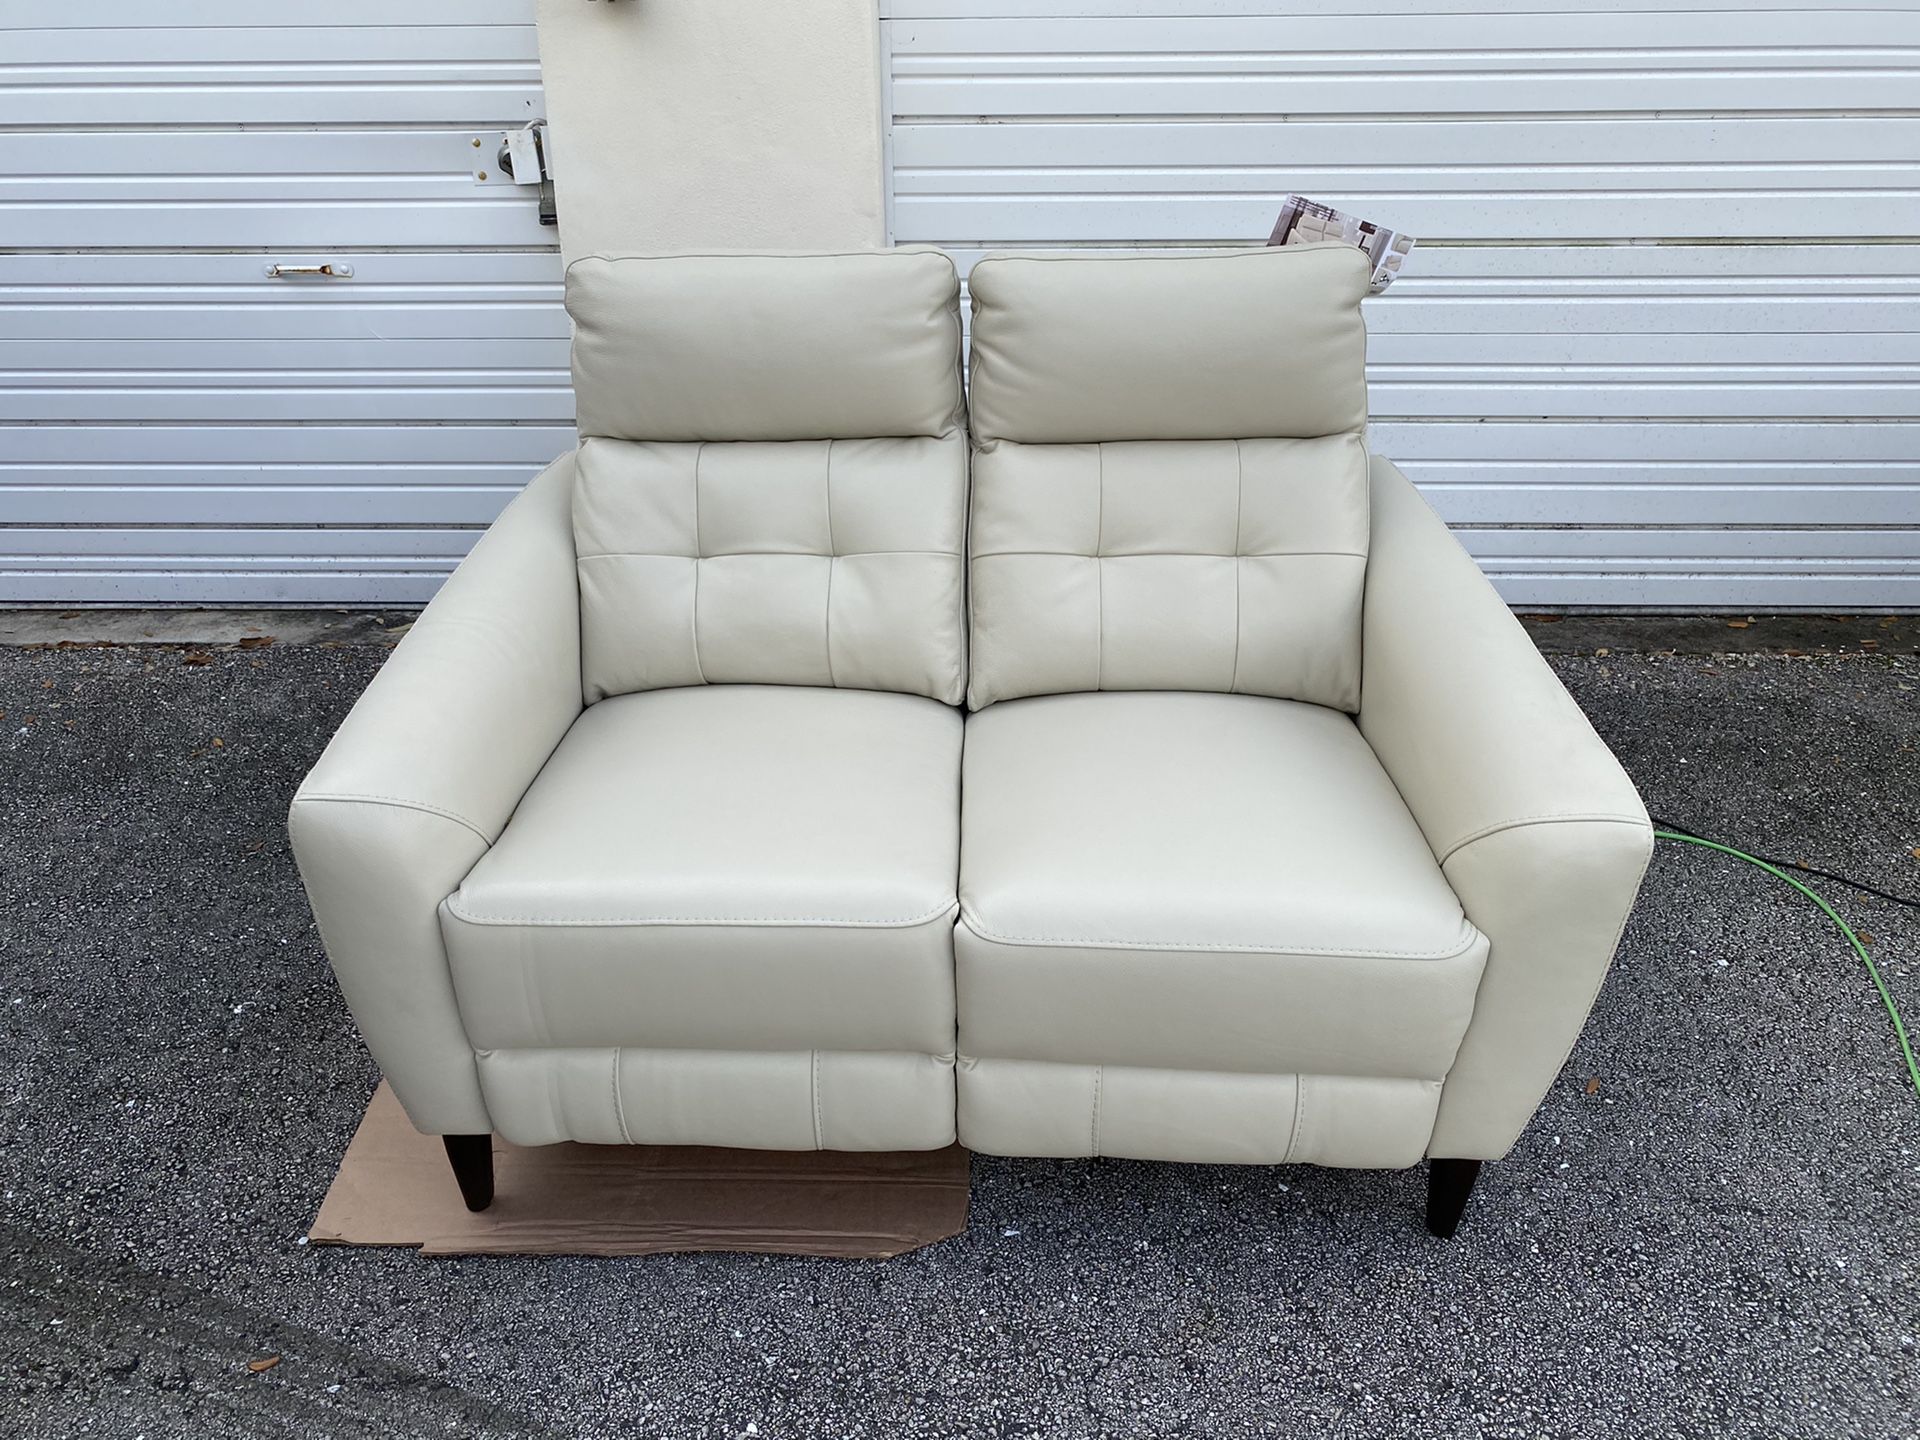 45% OFF // BRAND NEW // COSTCO Timmons Leather Power Reclining Loveseat with Power Headrest